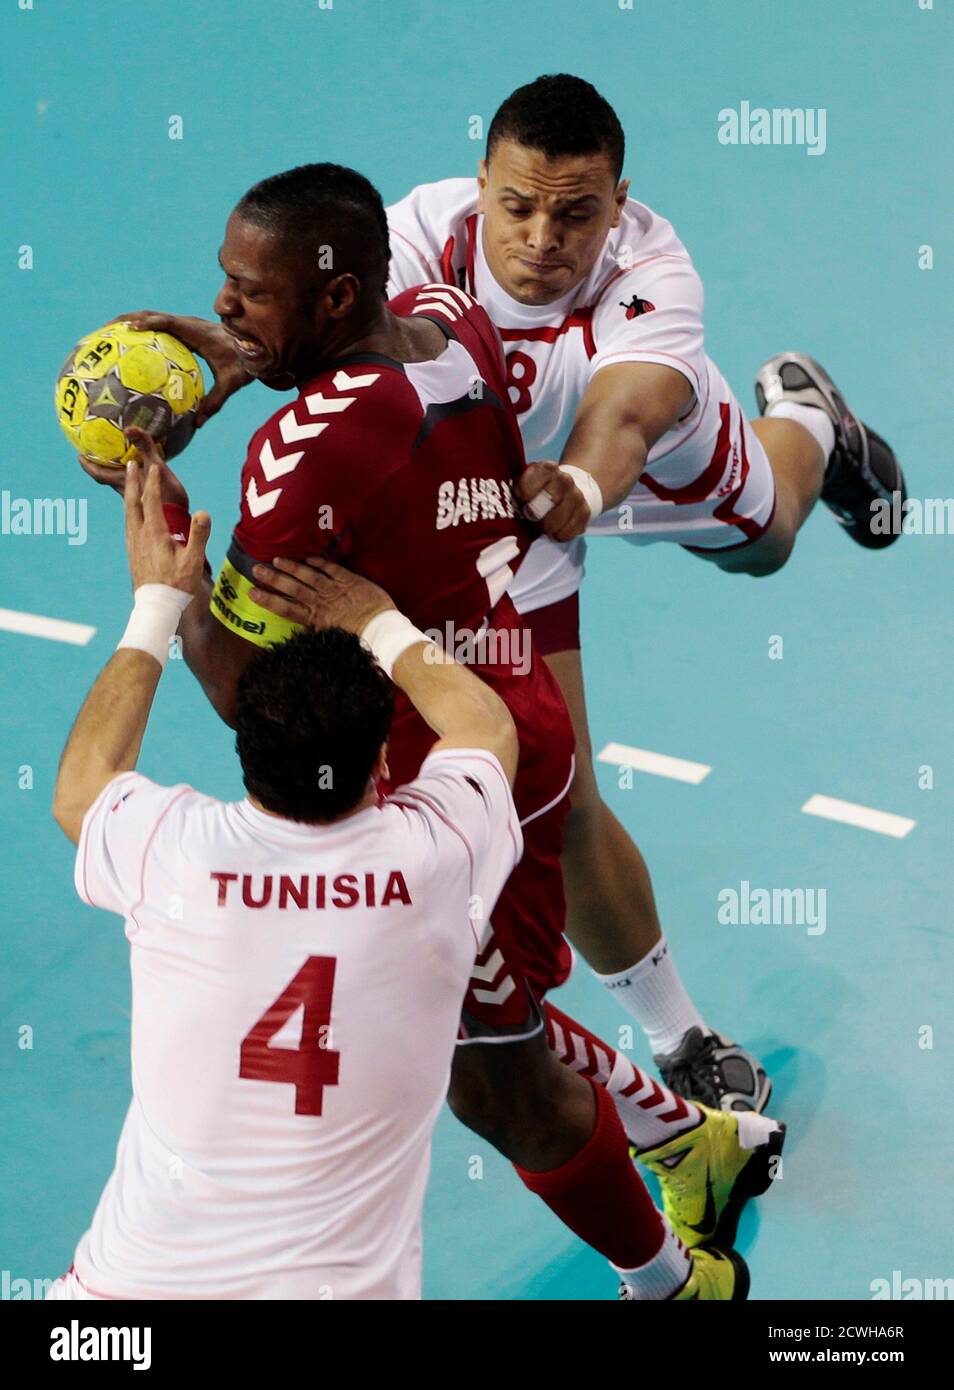 Bahrain's Saeed Jawher (C) tries to make a pass between Tunisia's Benali  Youssef and Mohamed Ali Bhar (4) during their men's handball game at the  Arab Games in Doha December 12, 2011.